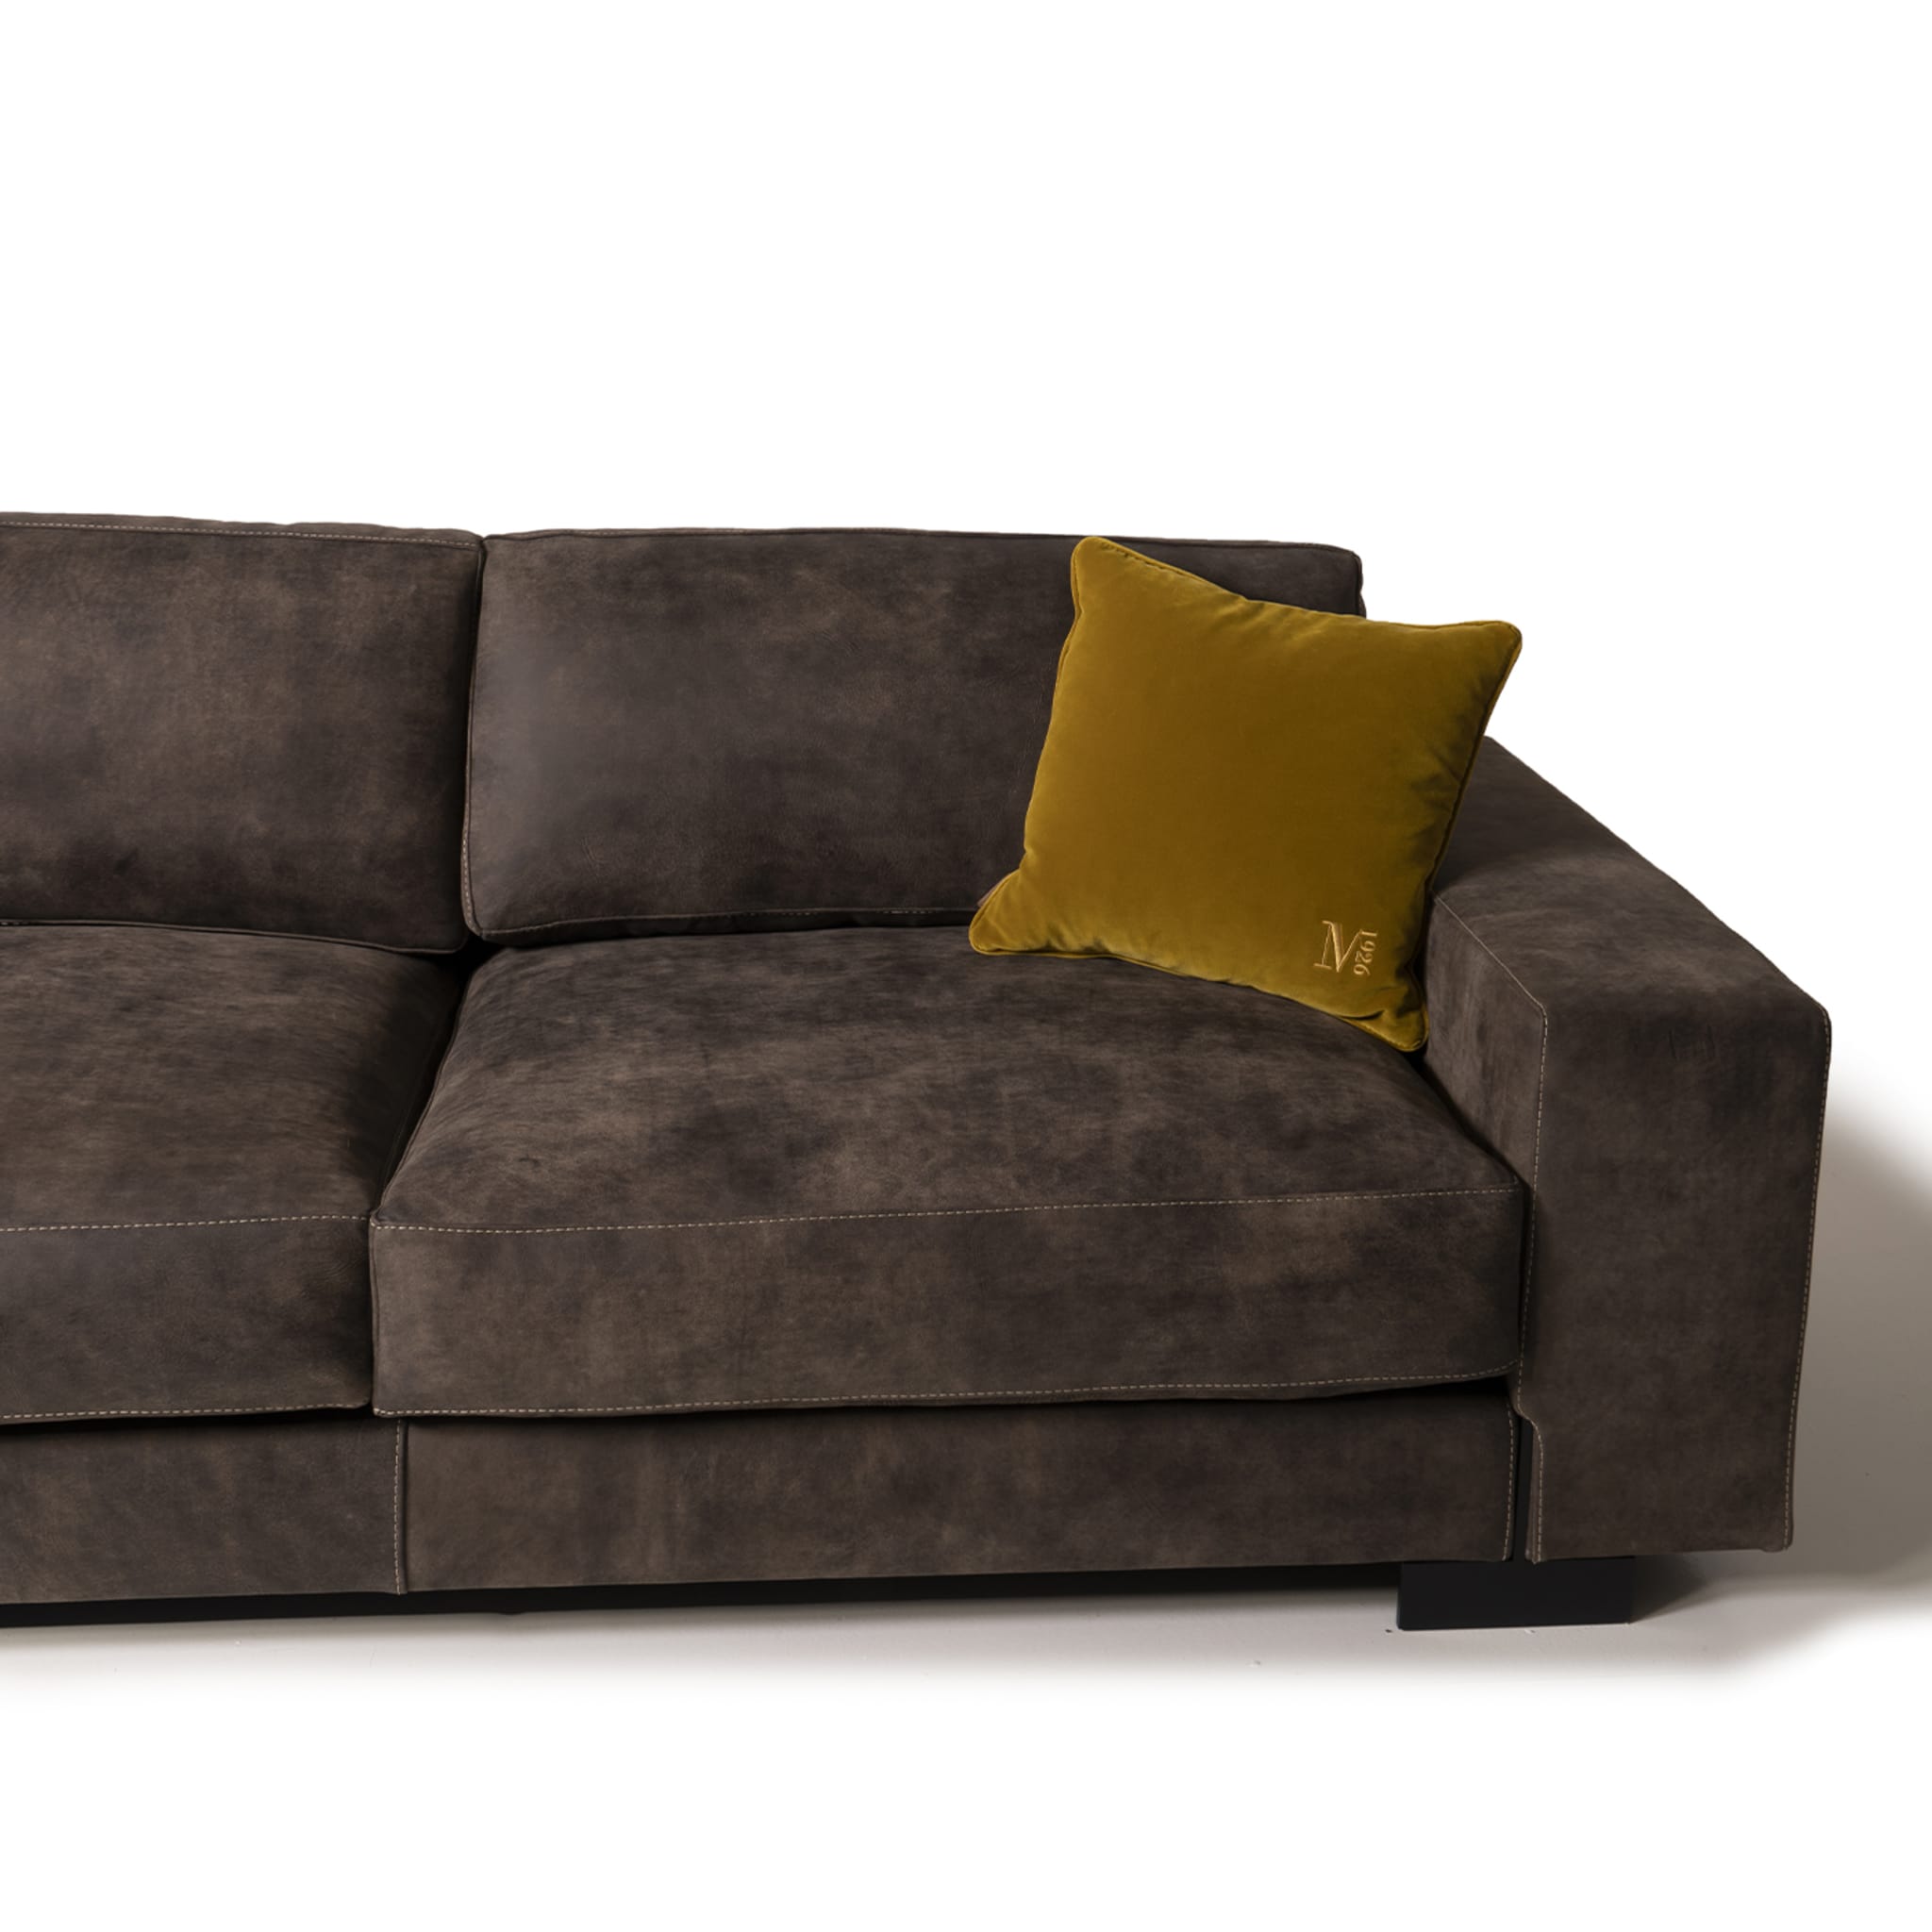 Glam 3-Seater Sofa By Marco and Giulio Mantellassi - Alternative view 2